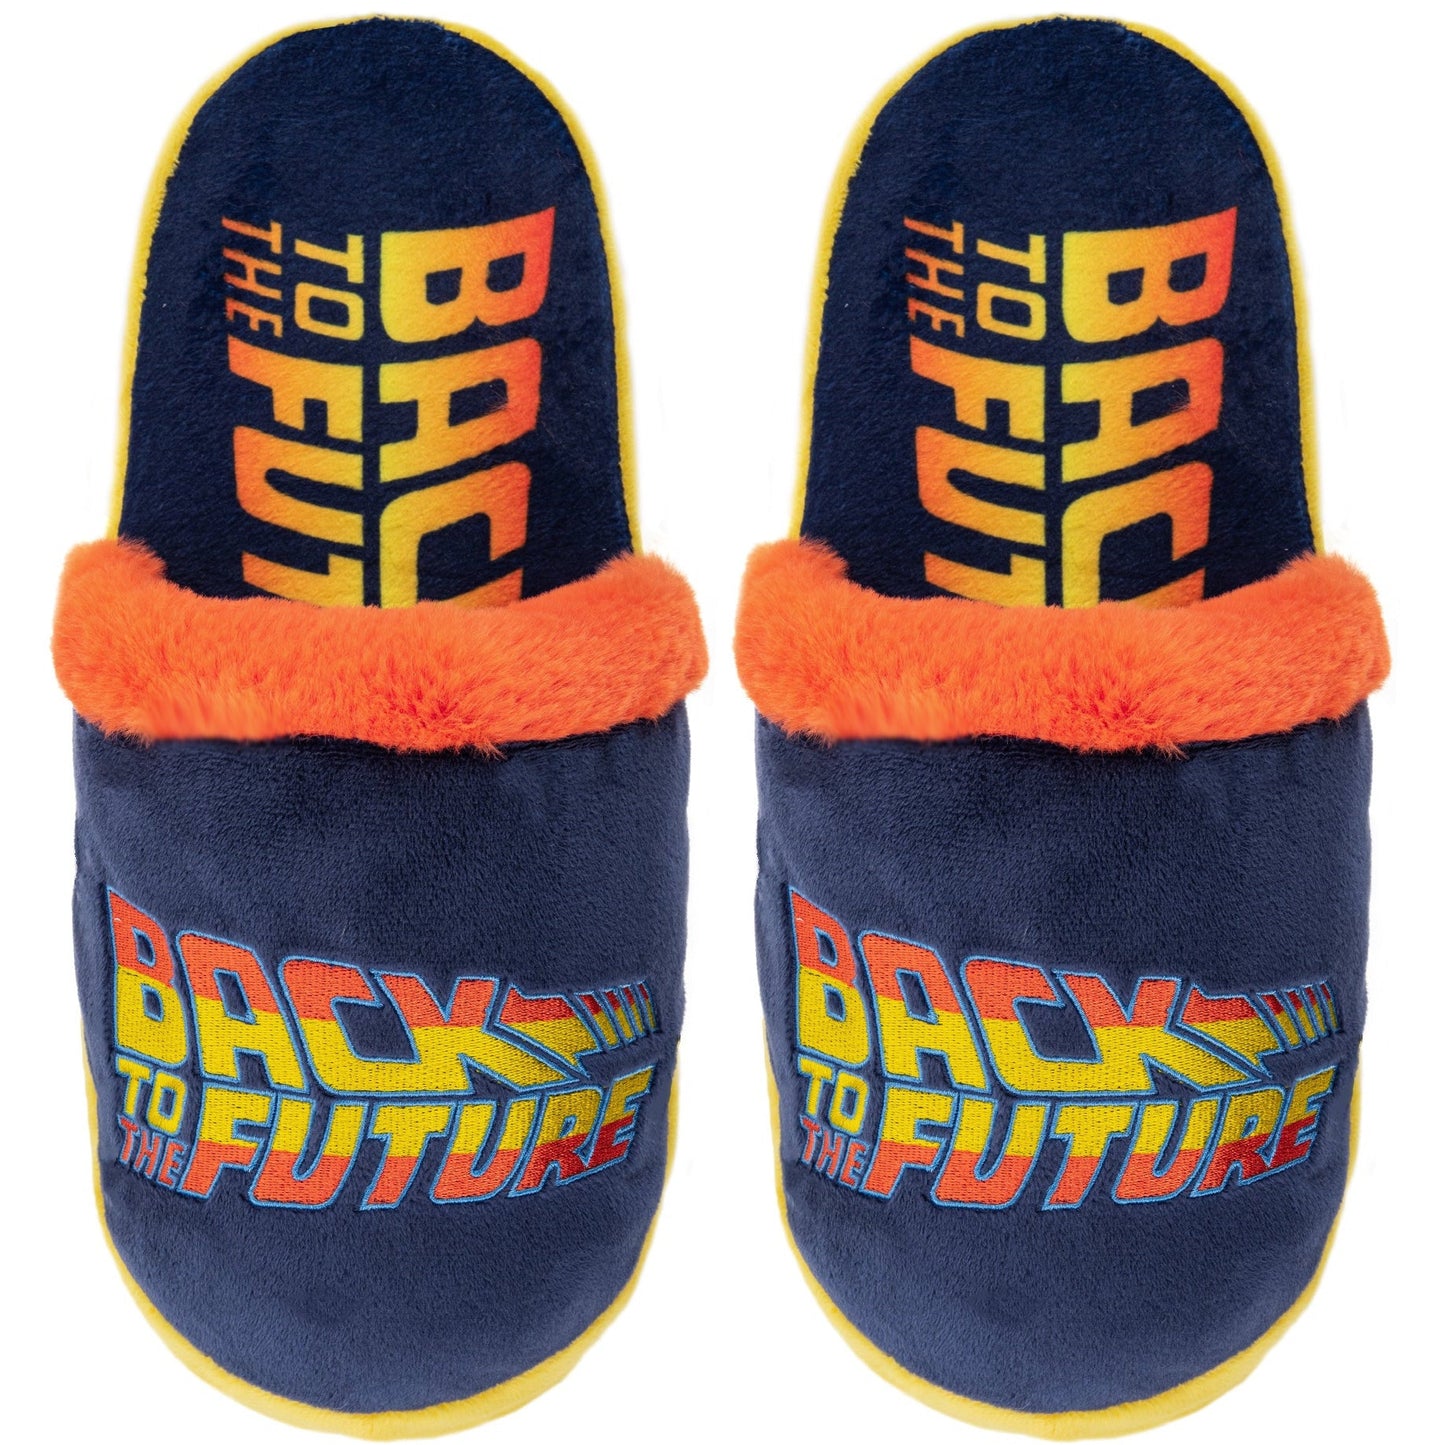 Back to the Future Fuzzy Slippers Slippers Odd Sox